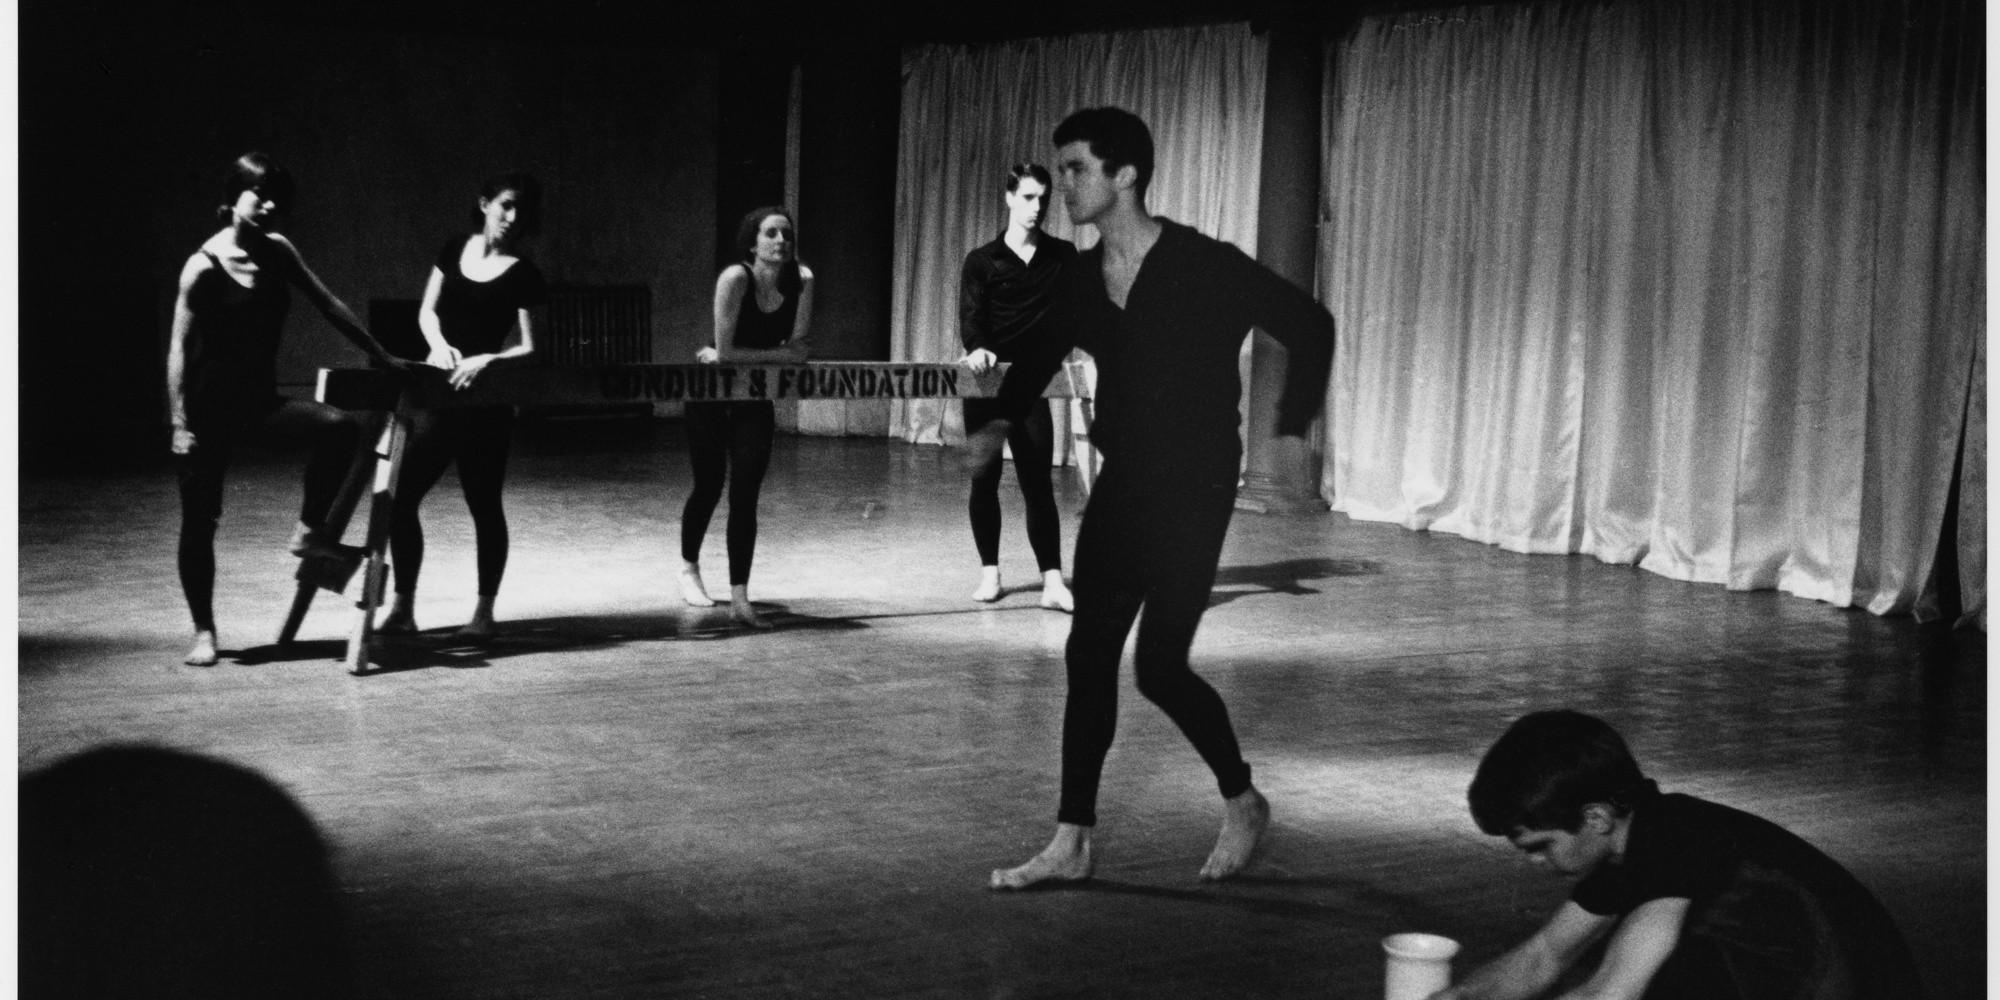 Peter Moore’s photograph of Terrain, 1963. Performed at Judson Memorial Church, April 28, 1963. Pictured, from left: William Davis, Albert Reid (foreground); Yvonne Rainer, Judith Dunn, Trisha Brown, Steve Paxton (background). © Barbara Moore/Licensed by VAGA, New York, NY. Courtesy Paula Cooper Gallery, New York